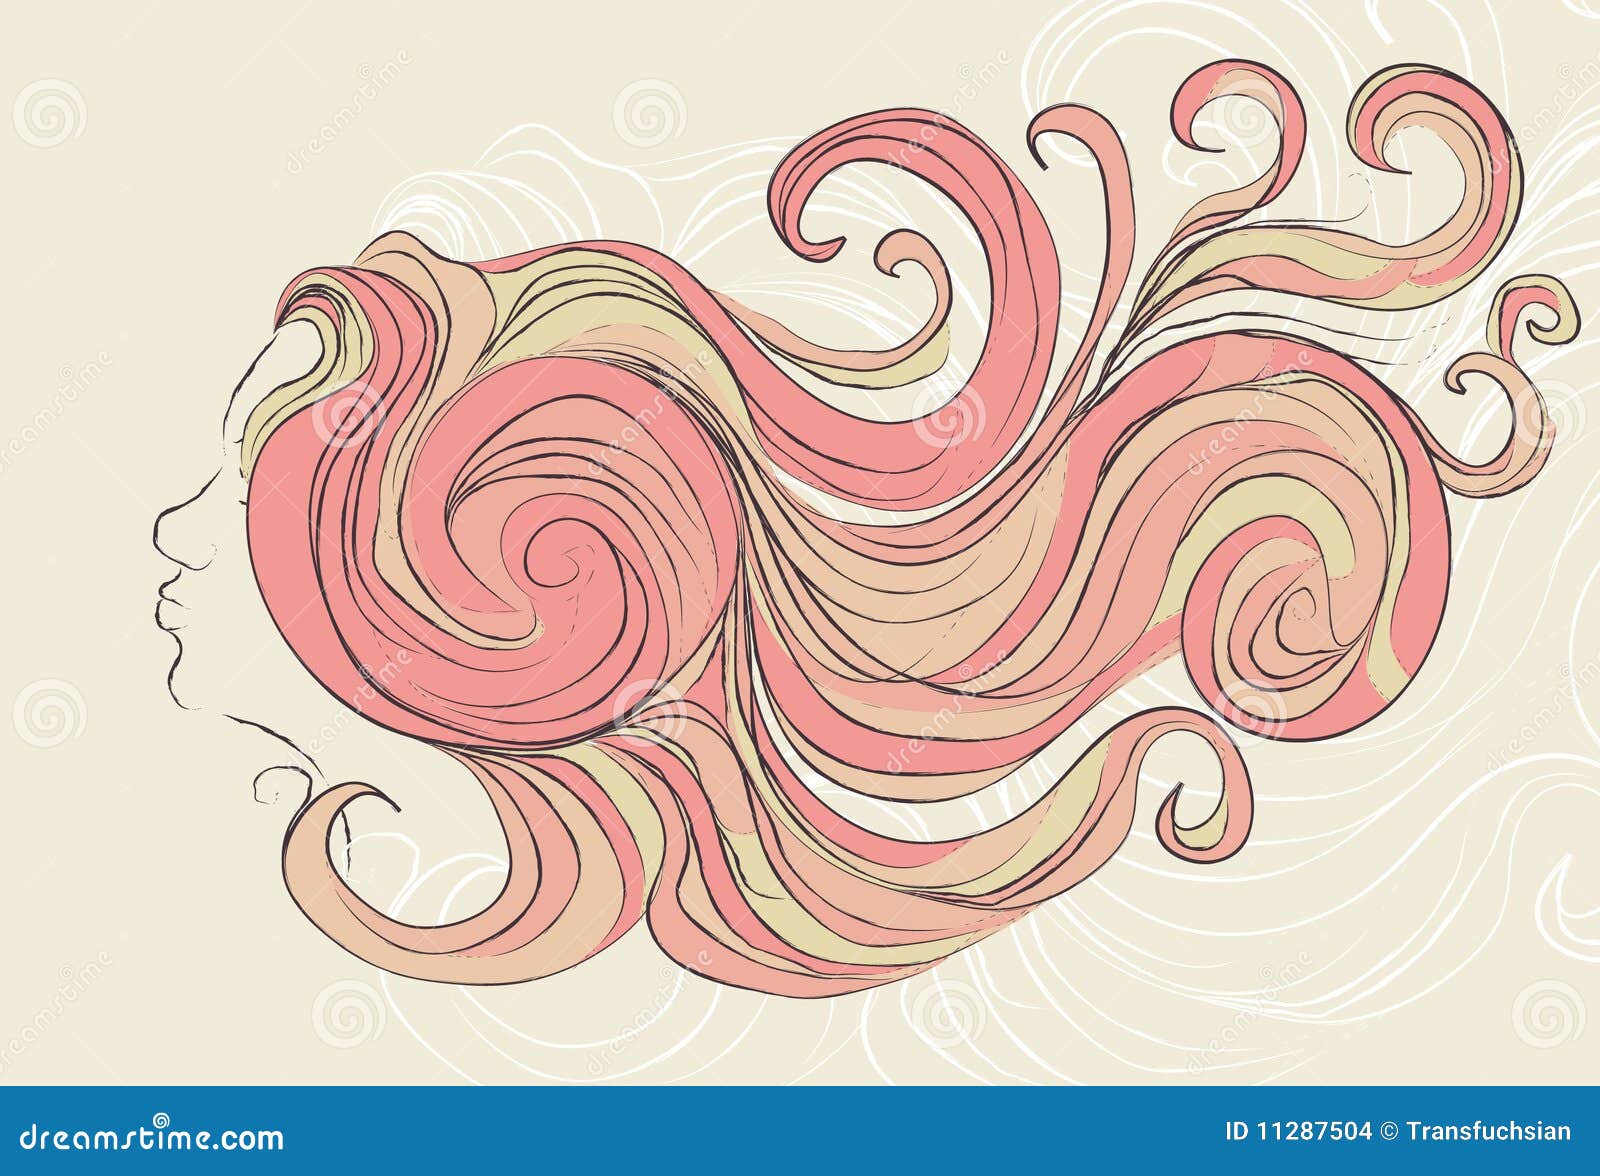 Stylized Messy Girl With Flowing Hair Stock Images - Image 